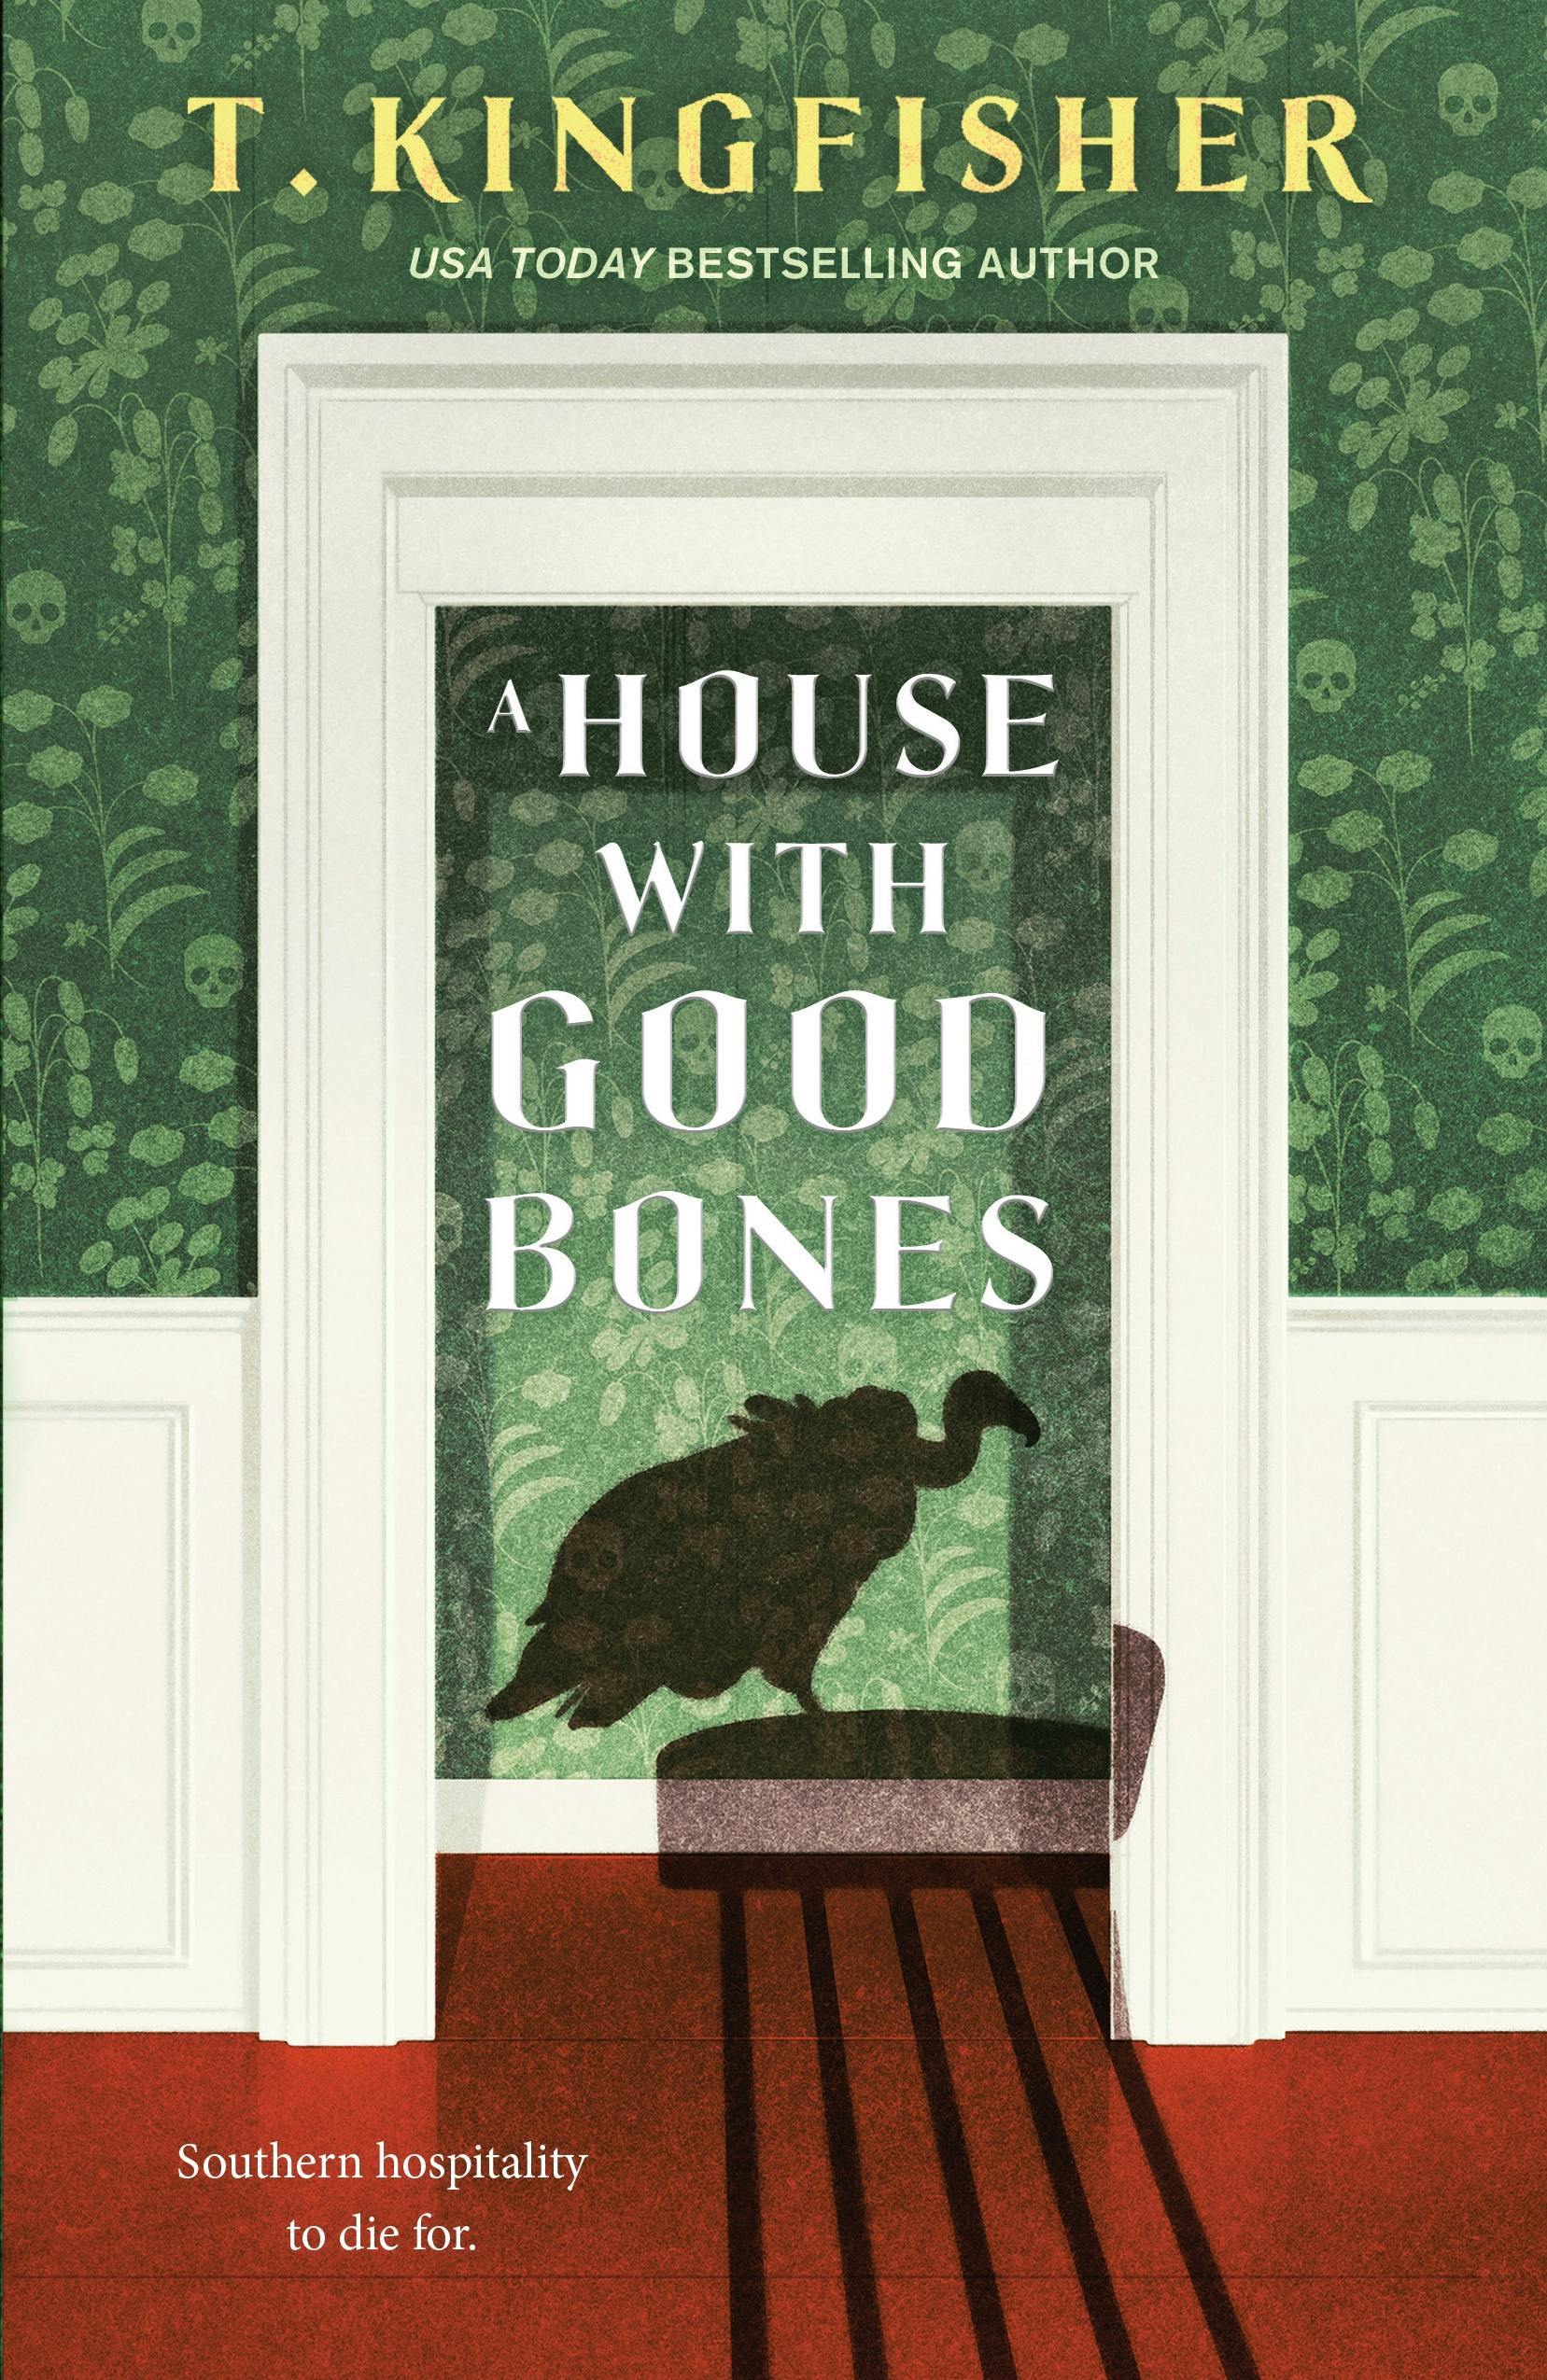 Cover for the book titled as: A House With Good Bones